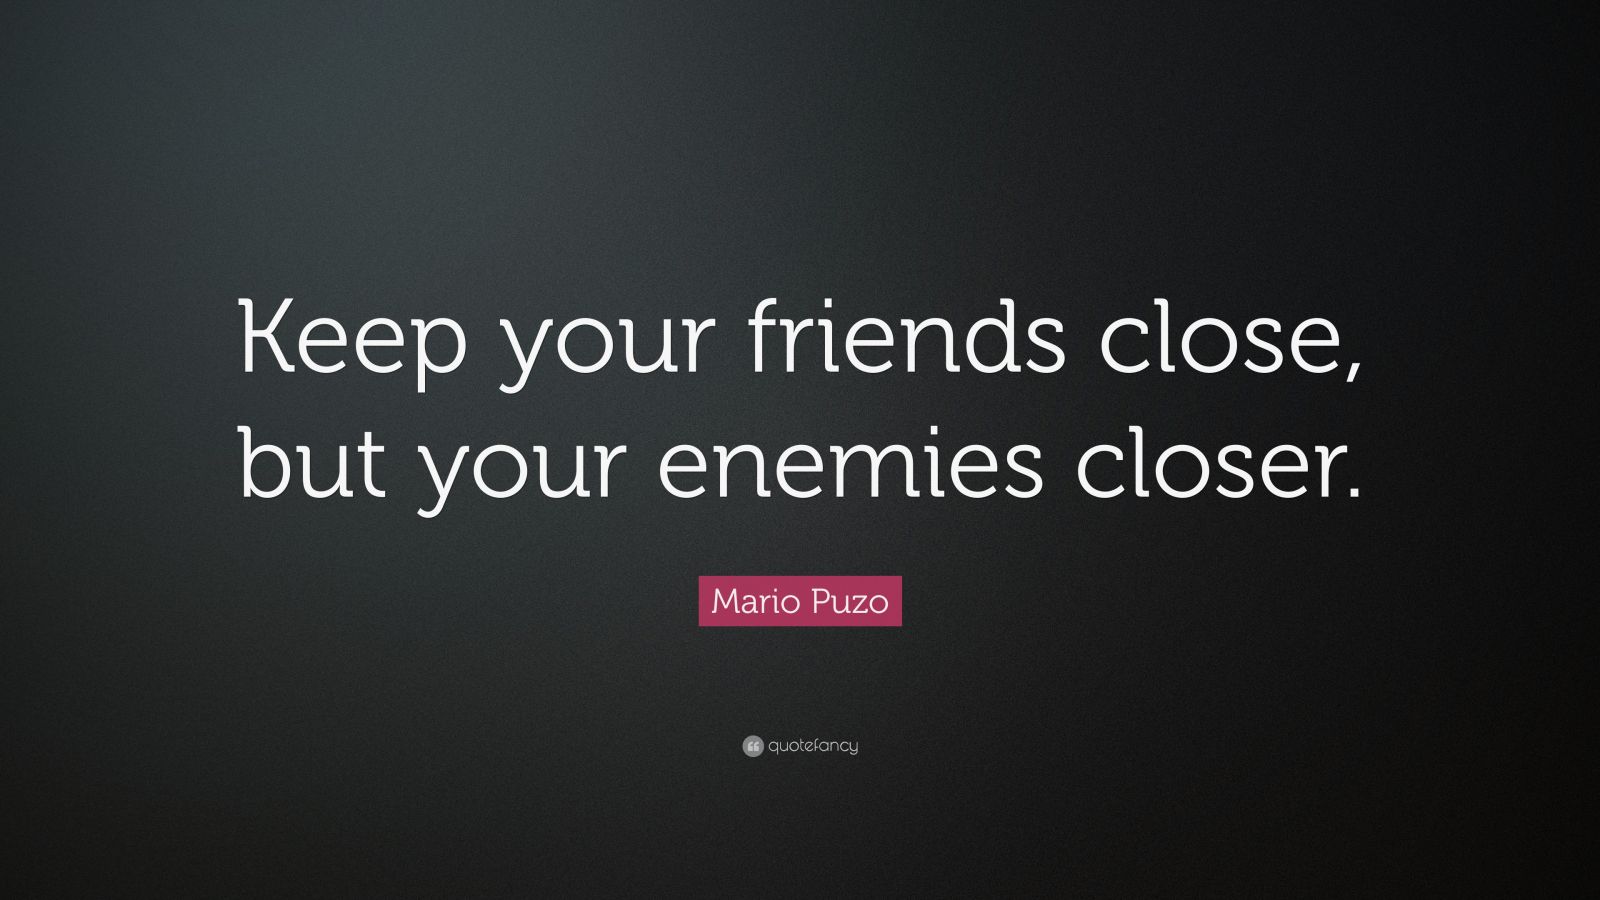 they say keep your enemies close quote